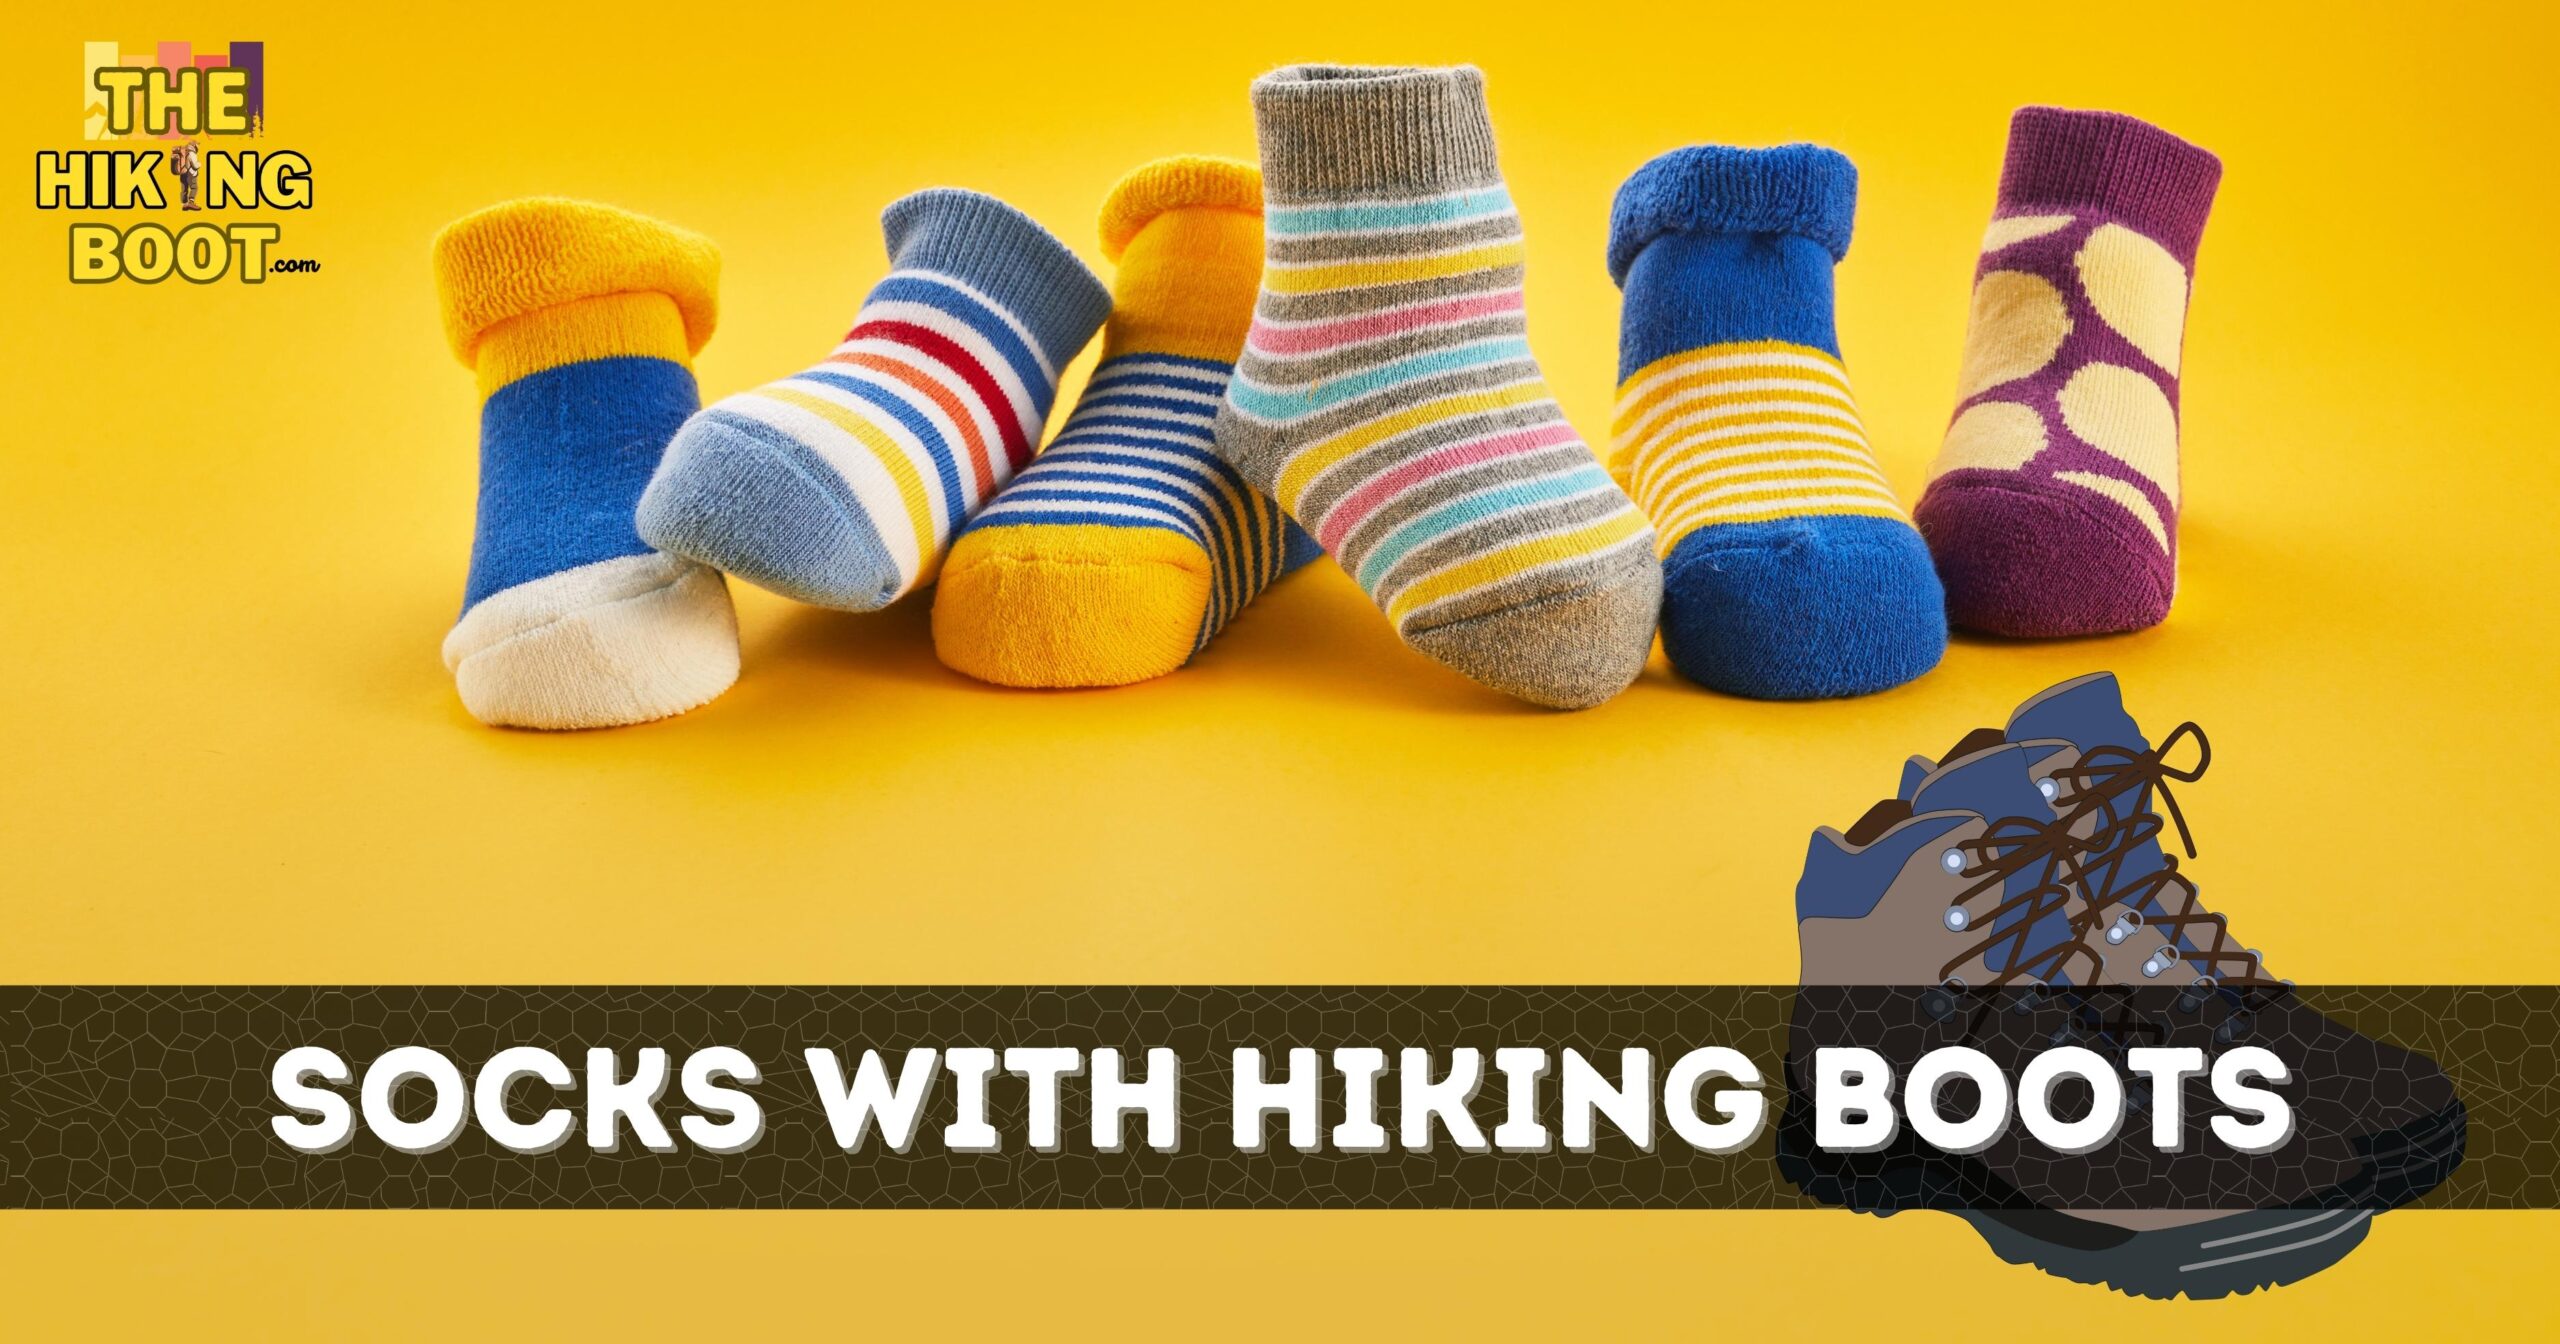 How To Wear Socks With Hiking Boots? 6 Important Tips